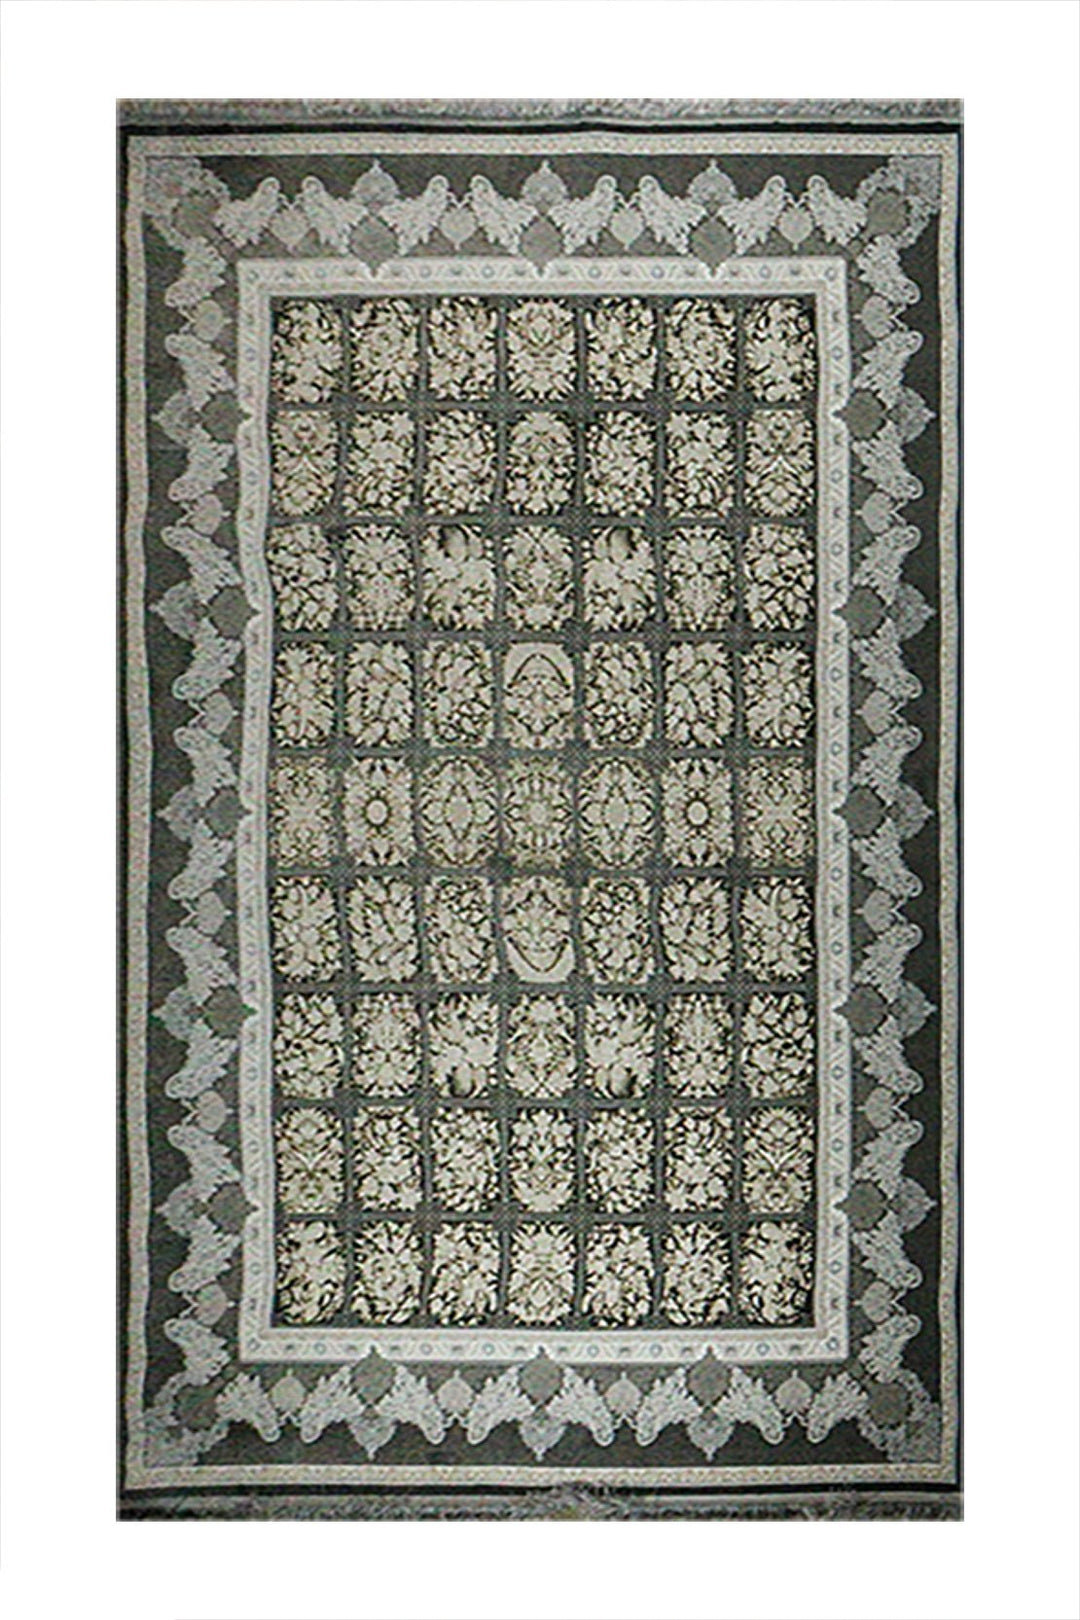 Iranian Premium Quality Oriental Collection Rug - 8.2 x 11. FT - Gray - Resilient Construction for Long-Lasting Use - V Surfaces